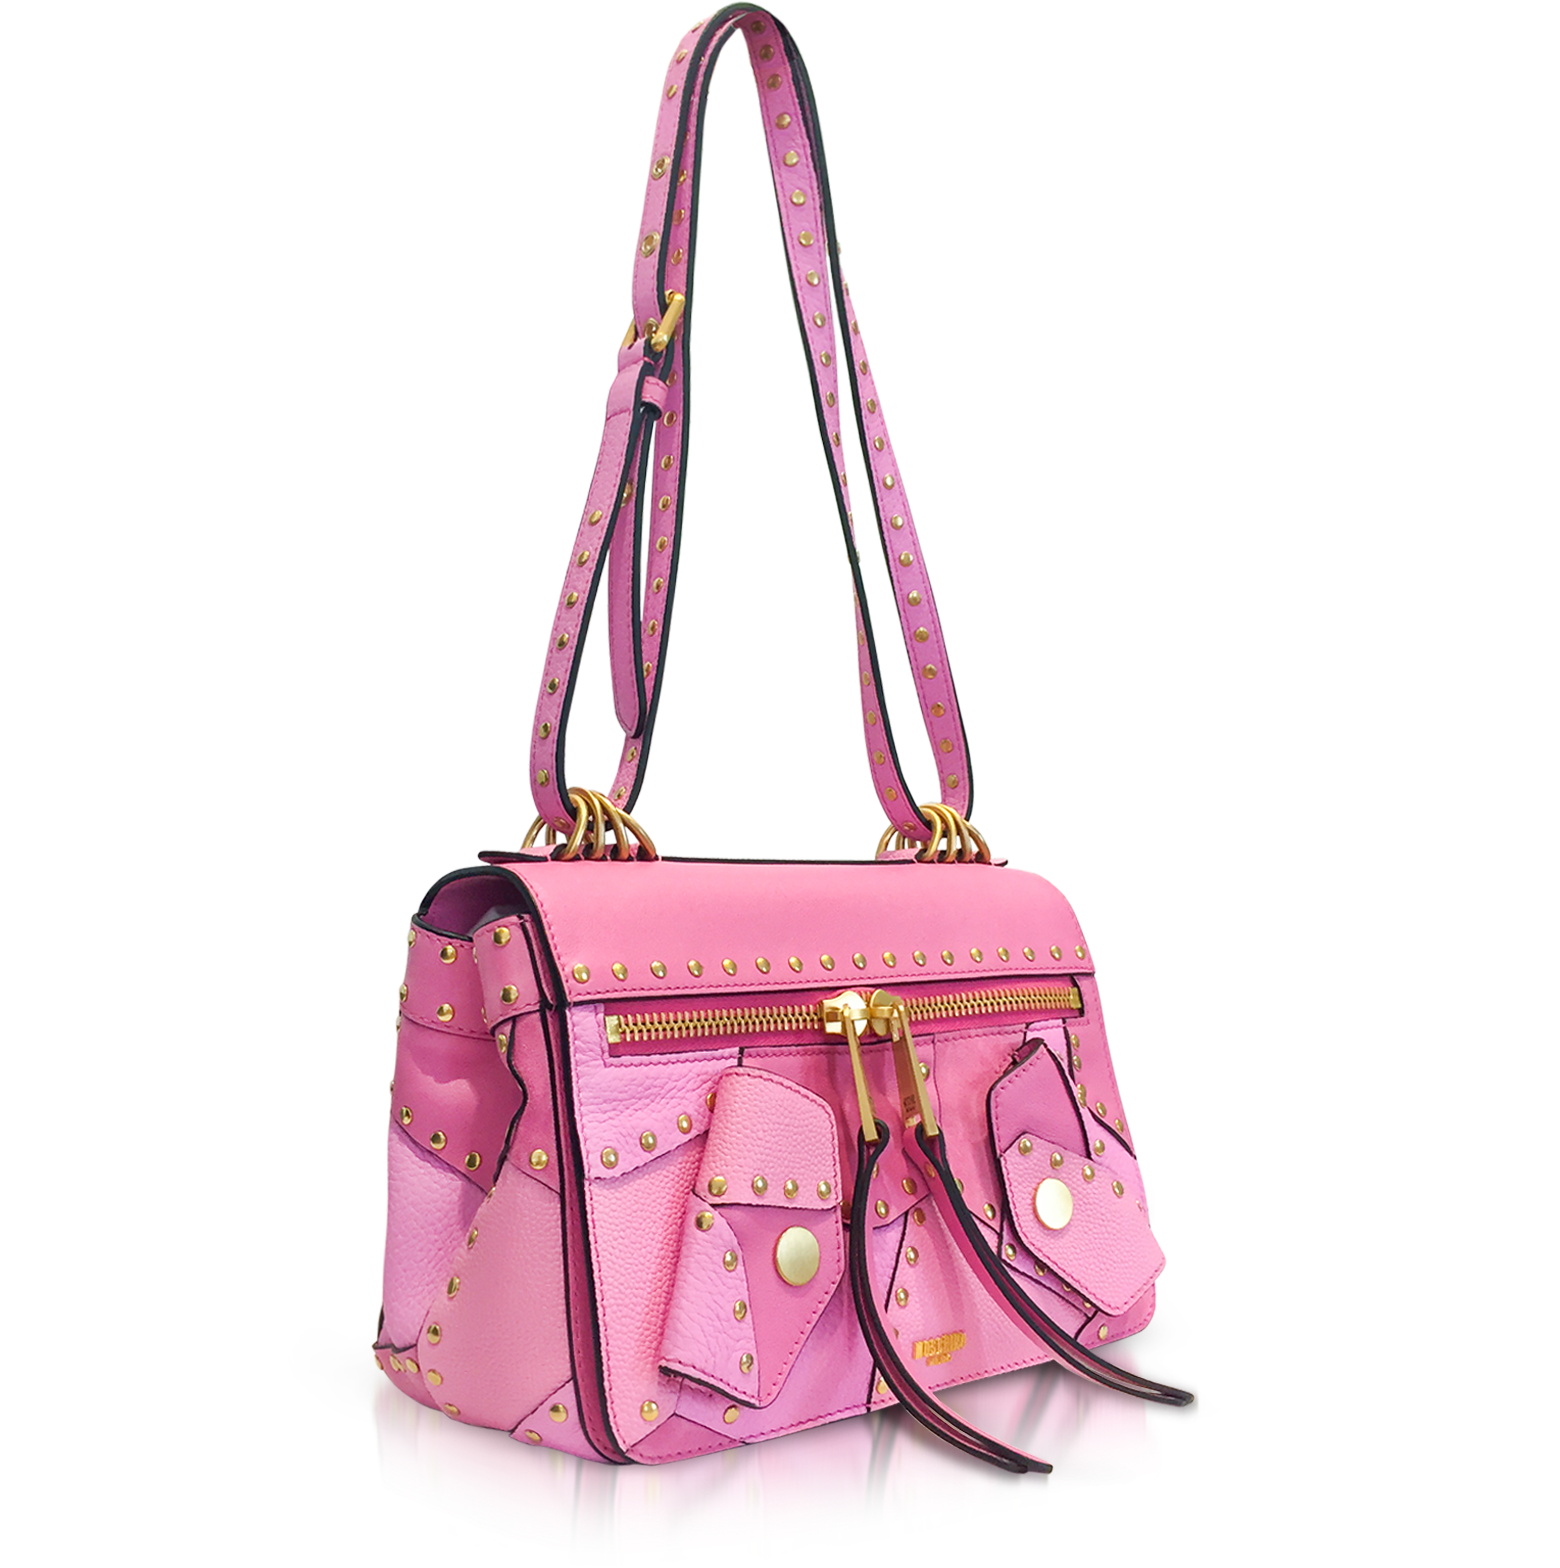 Moschino Pink Leather Shoulder Bag w/Golden Studs at FORZIERI